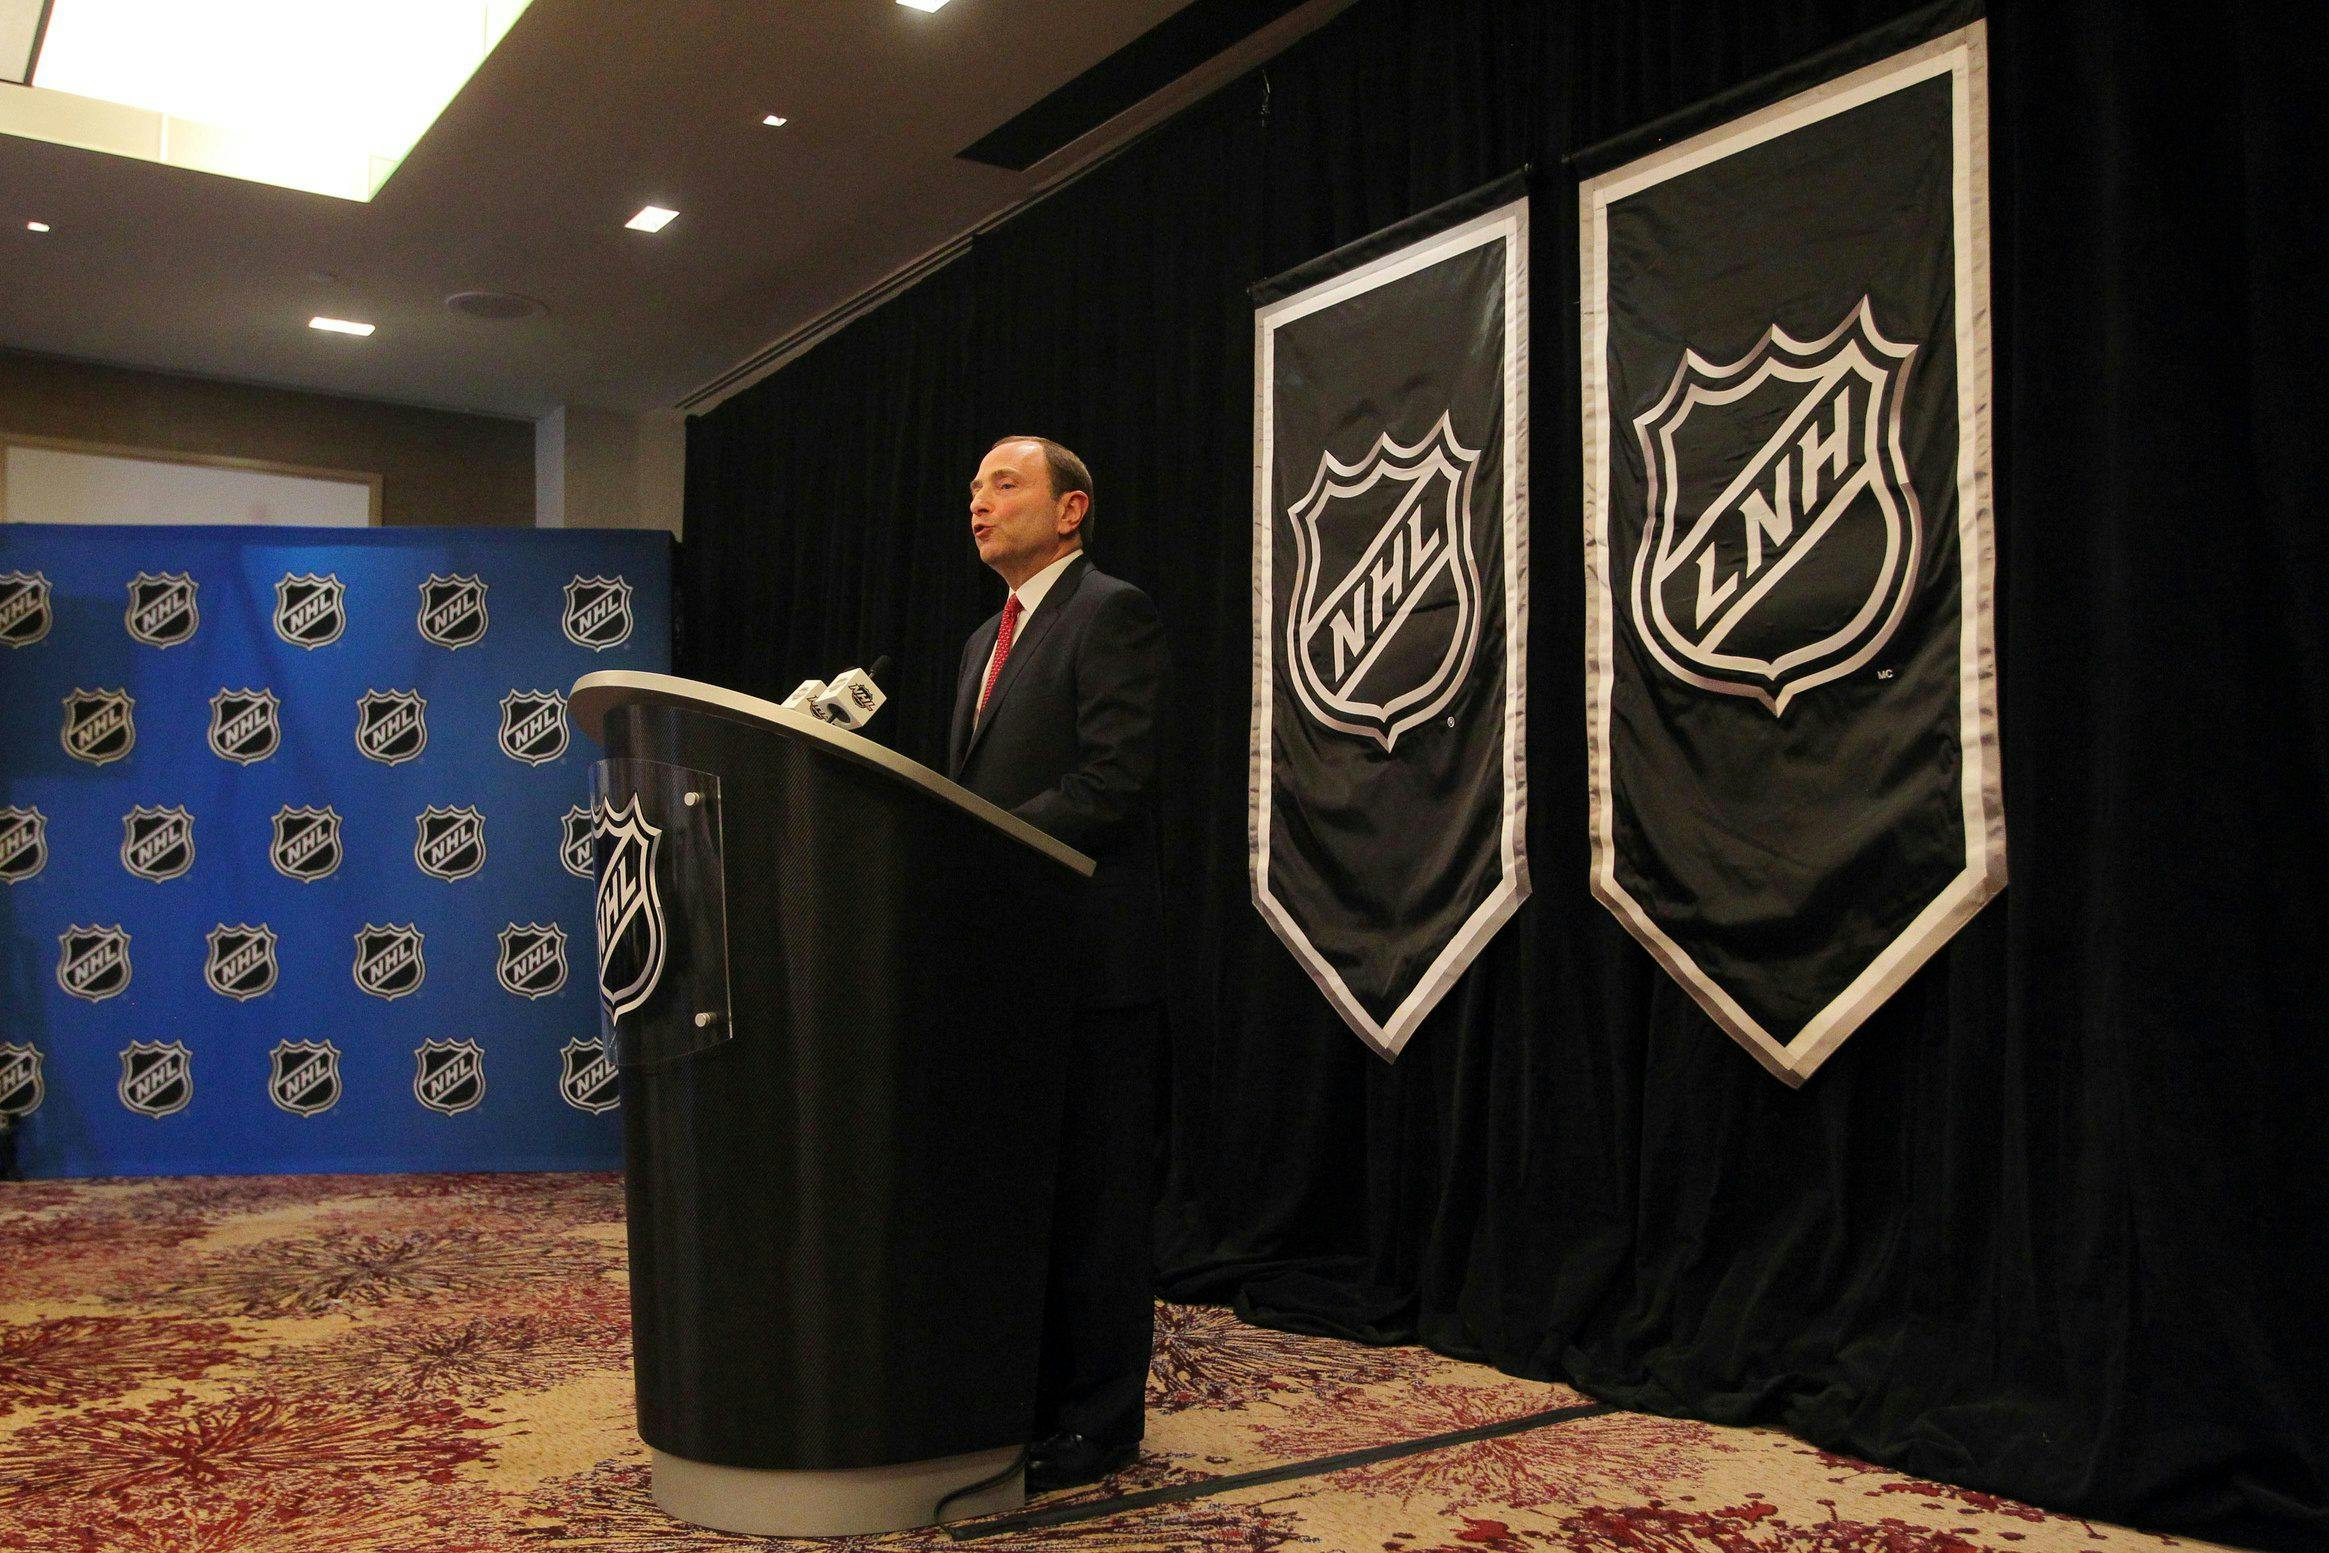 Similar salary cap projection expected on Day 2 of NHL Board of Governors meetings